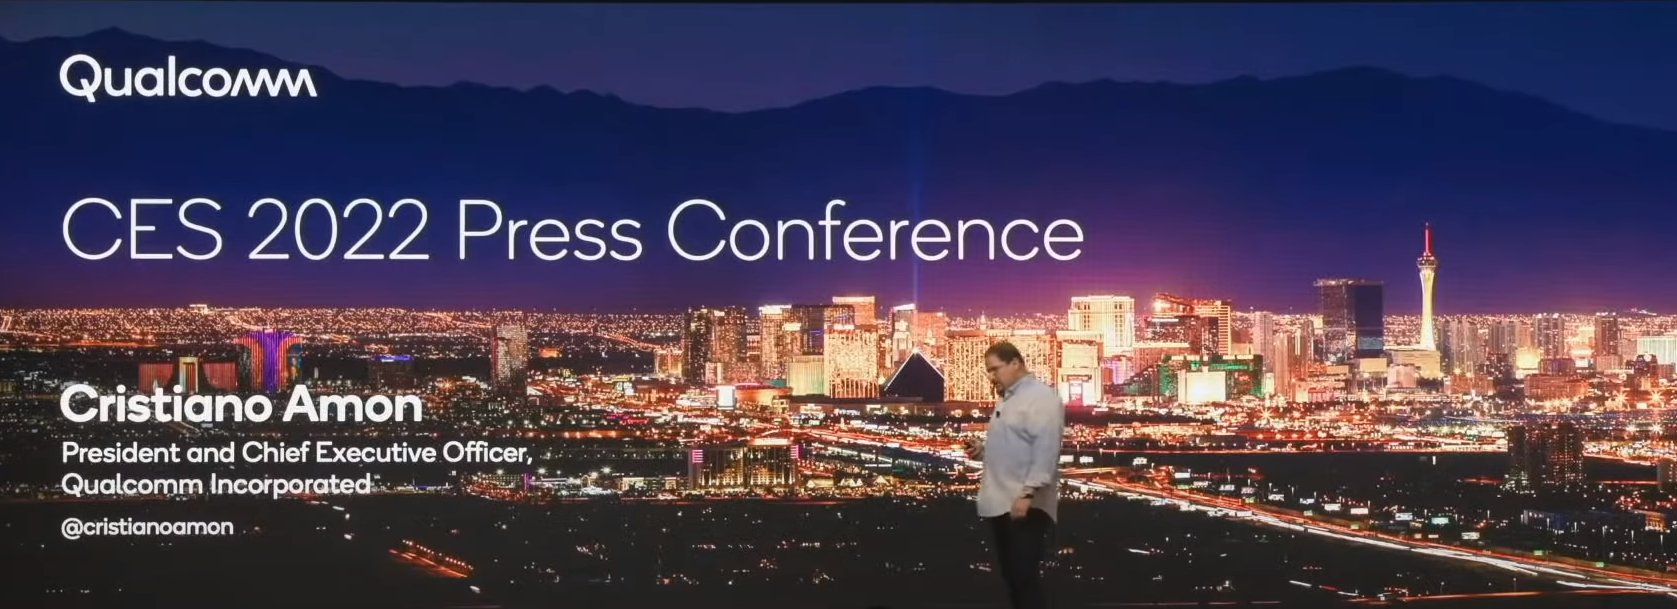 Qualcomm - Cristiano Amon Keynote - Counterpoint Research CES 2022